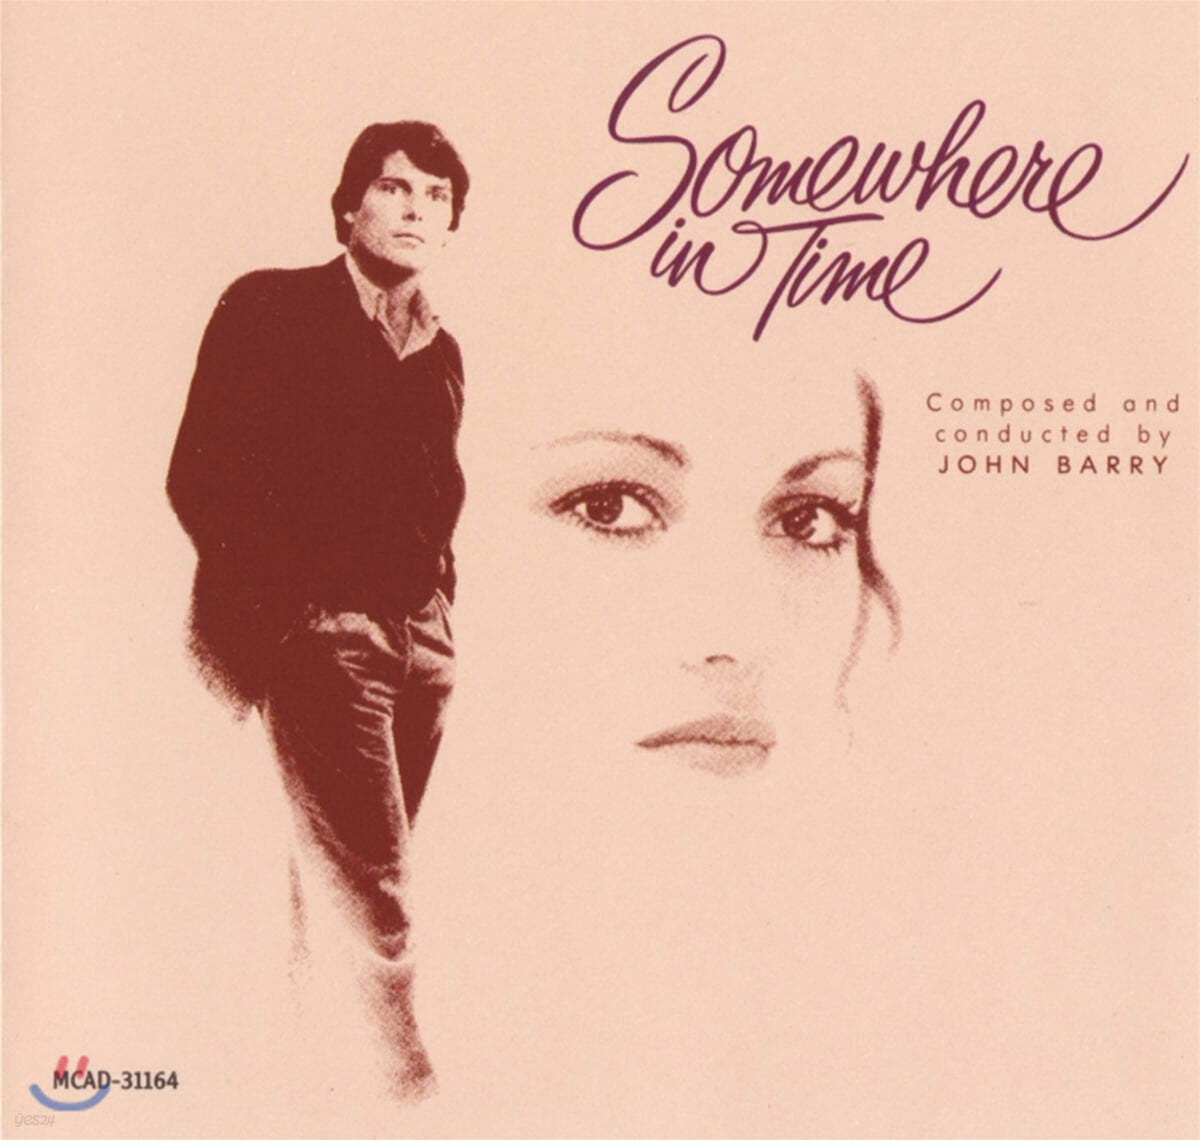 [CD] 사랑의 은하수 영화음악 (Somewhere In Time OST by John Barry) 